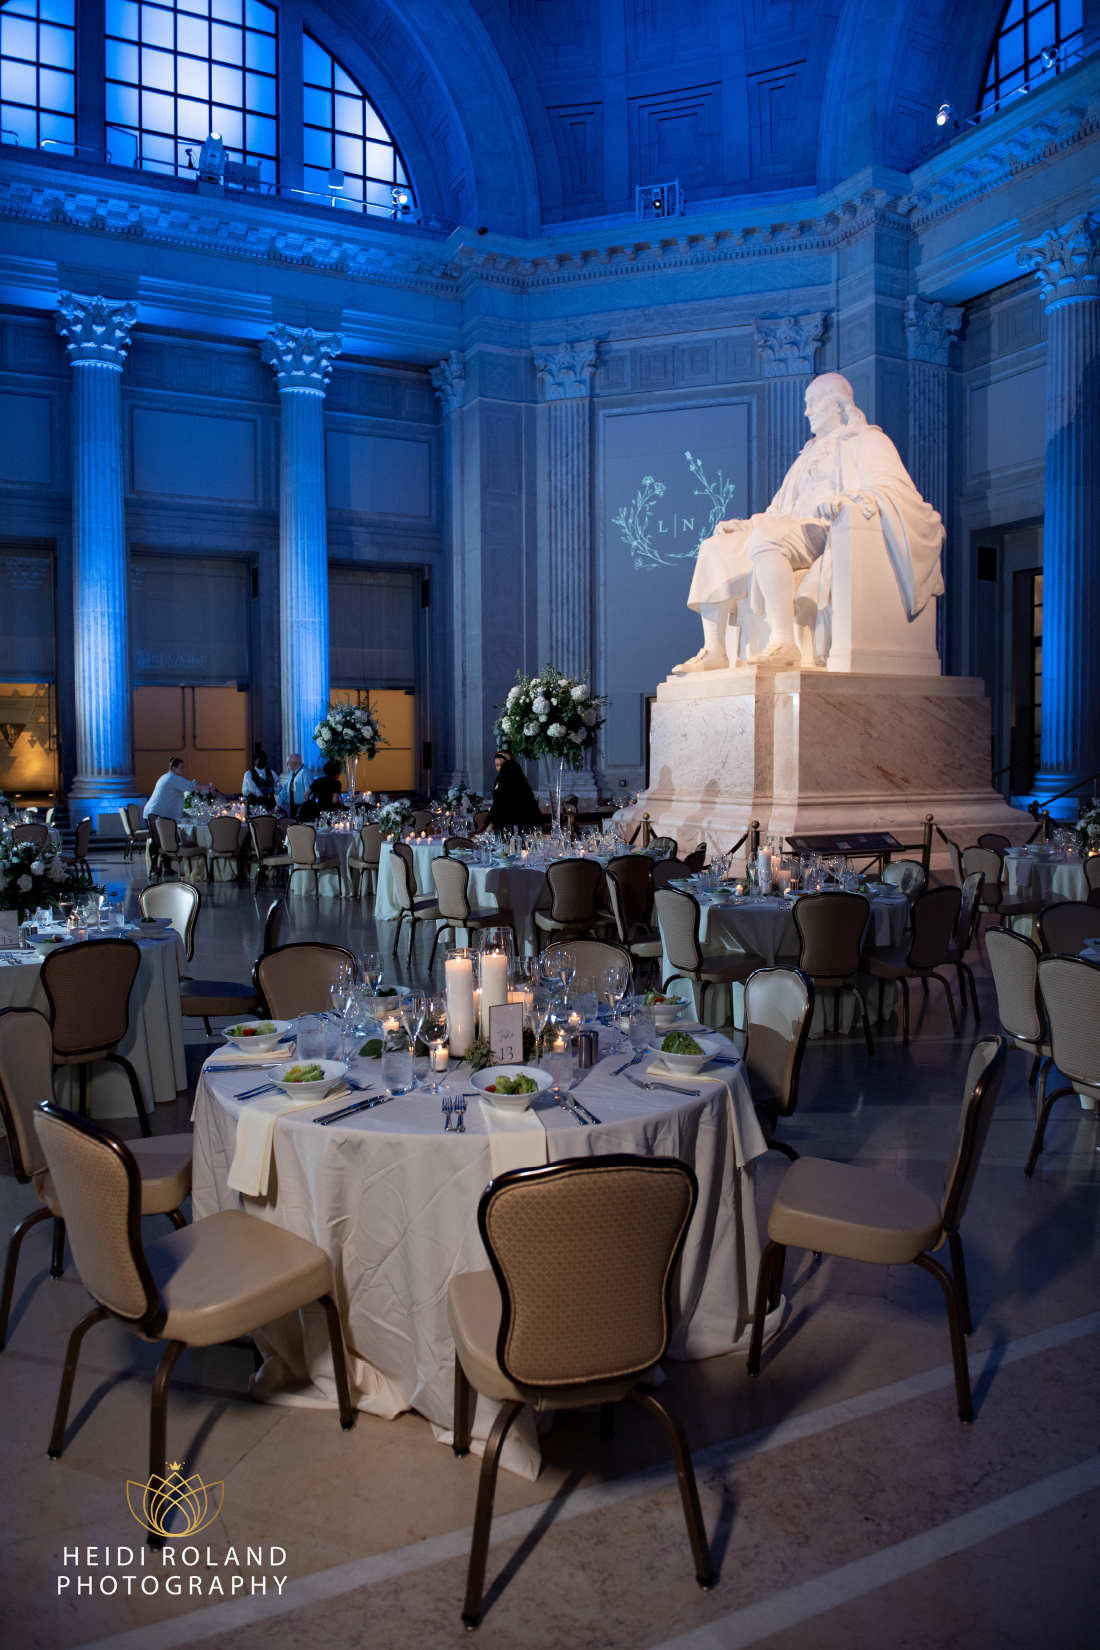 Reception set up in main hall of the Franklin Institute in Philadelphia with Ben Franklin statue